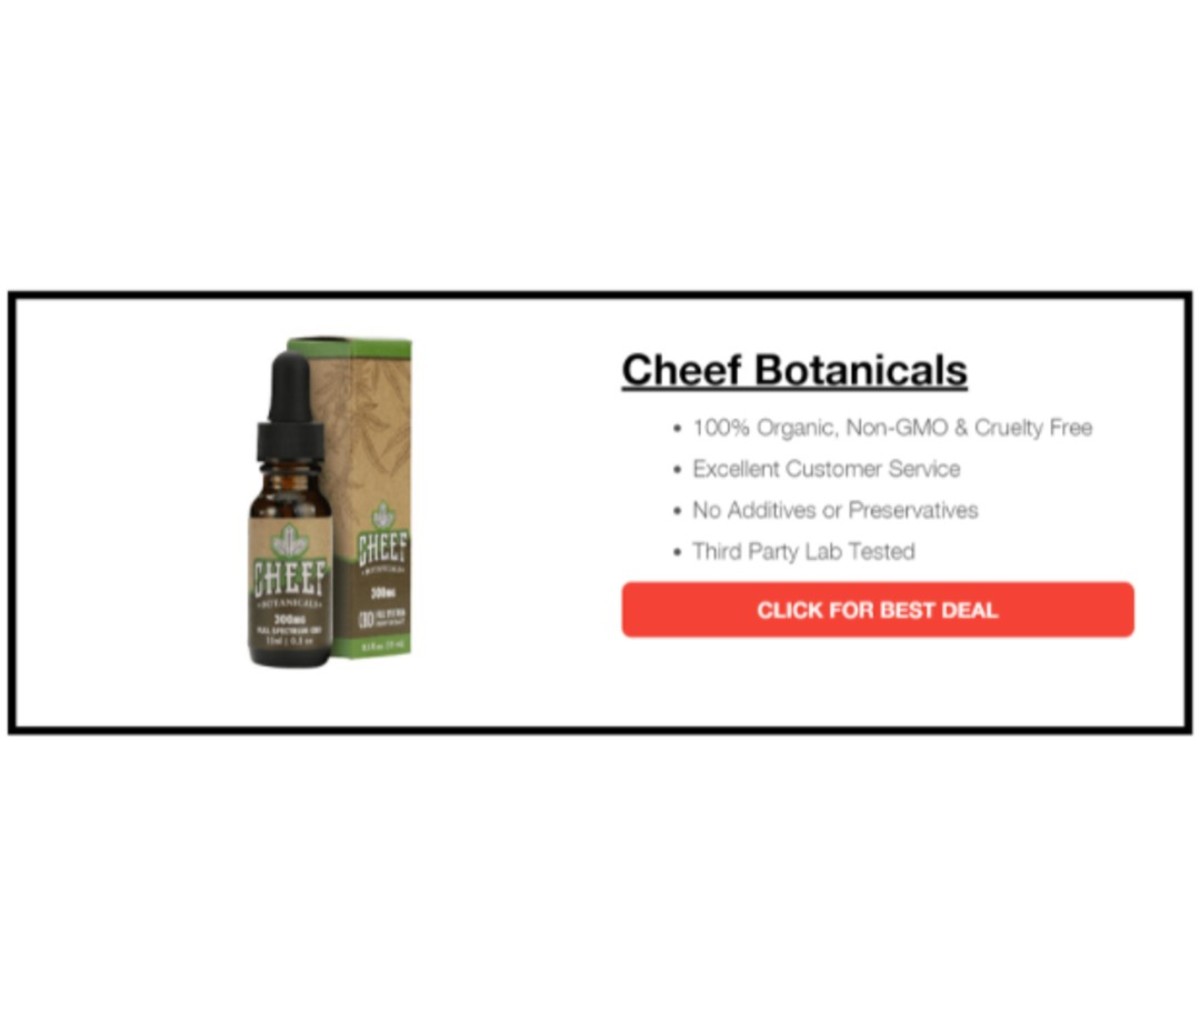 Cheef Botanicals – Famous Brand for Hemp Seed Oil